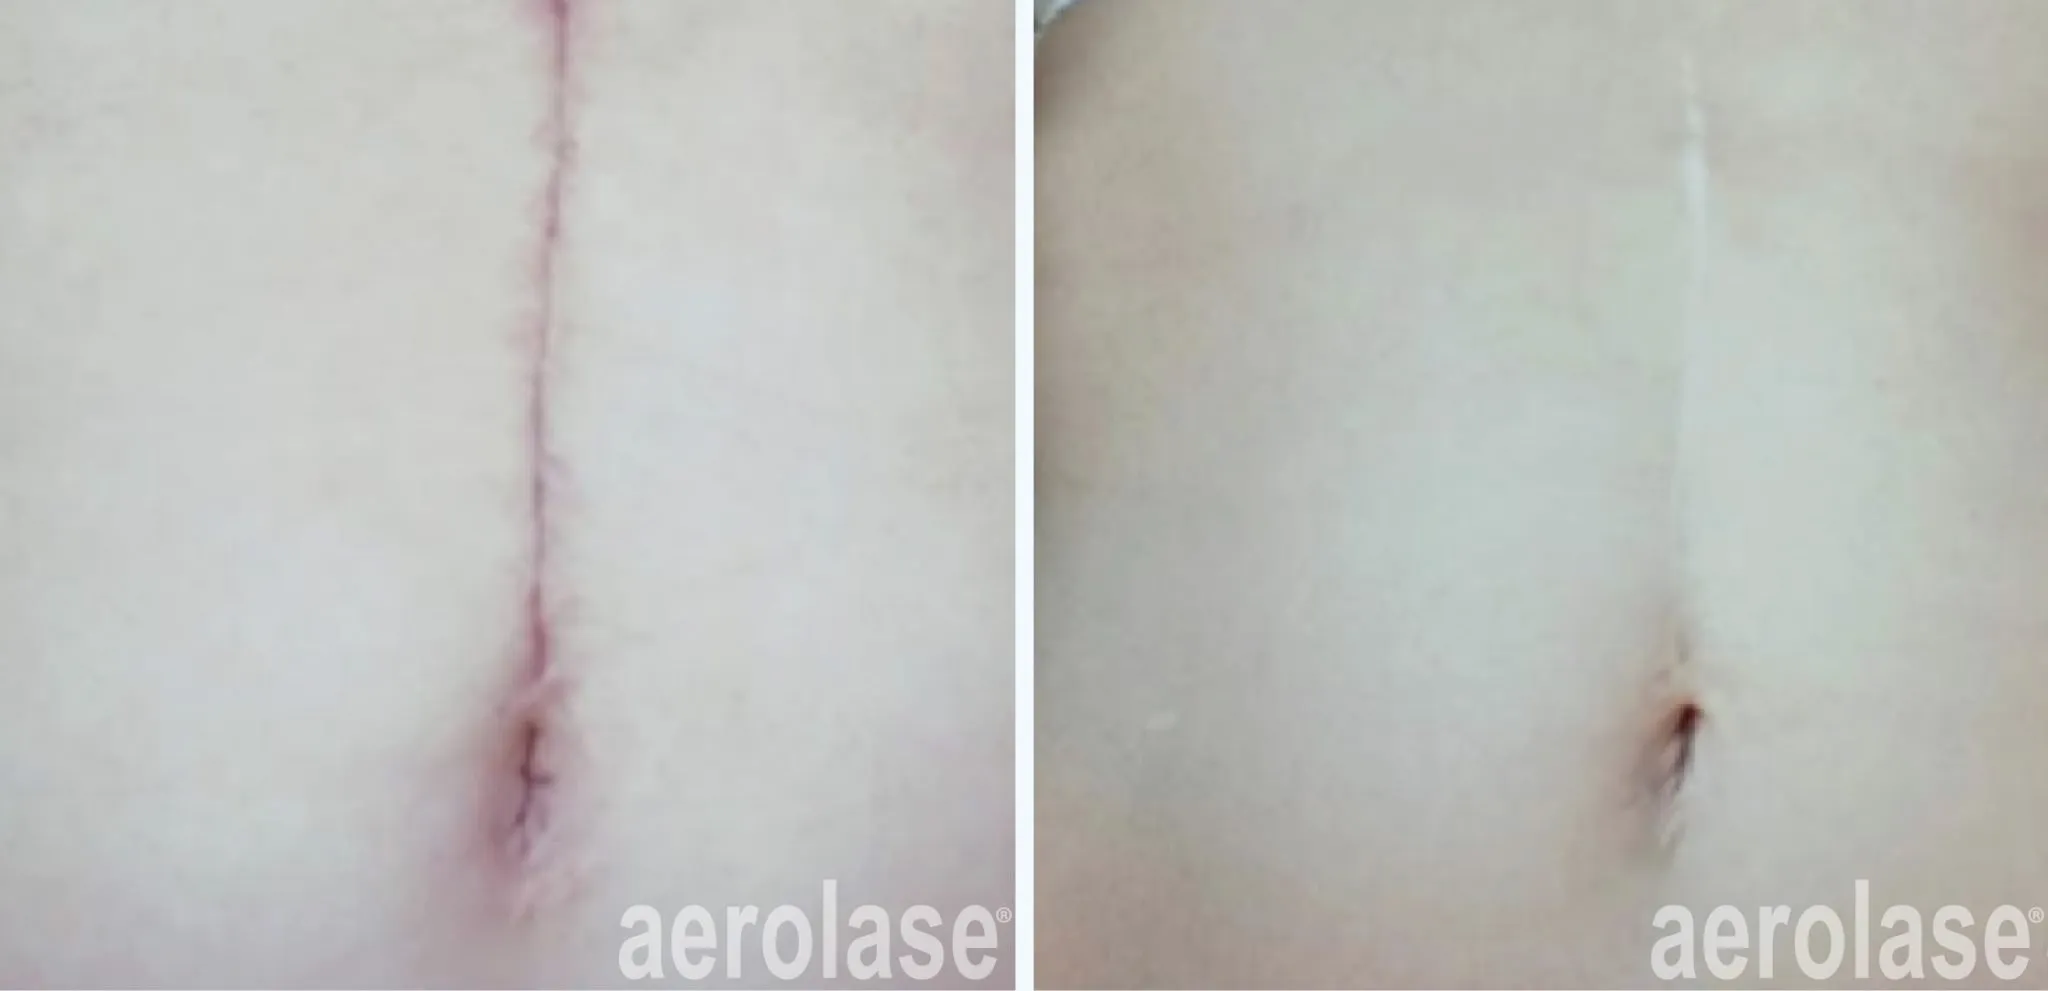 post-surgical-scar-before-and-after